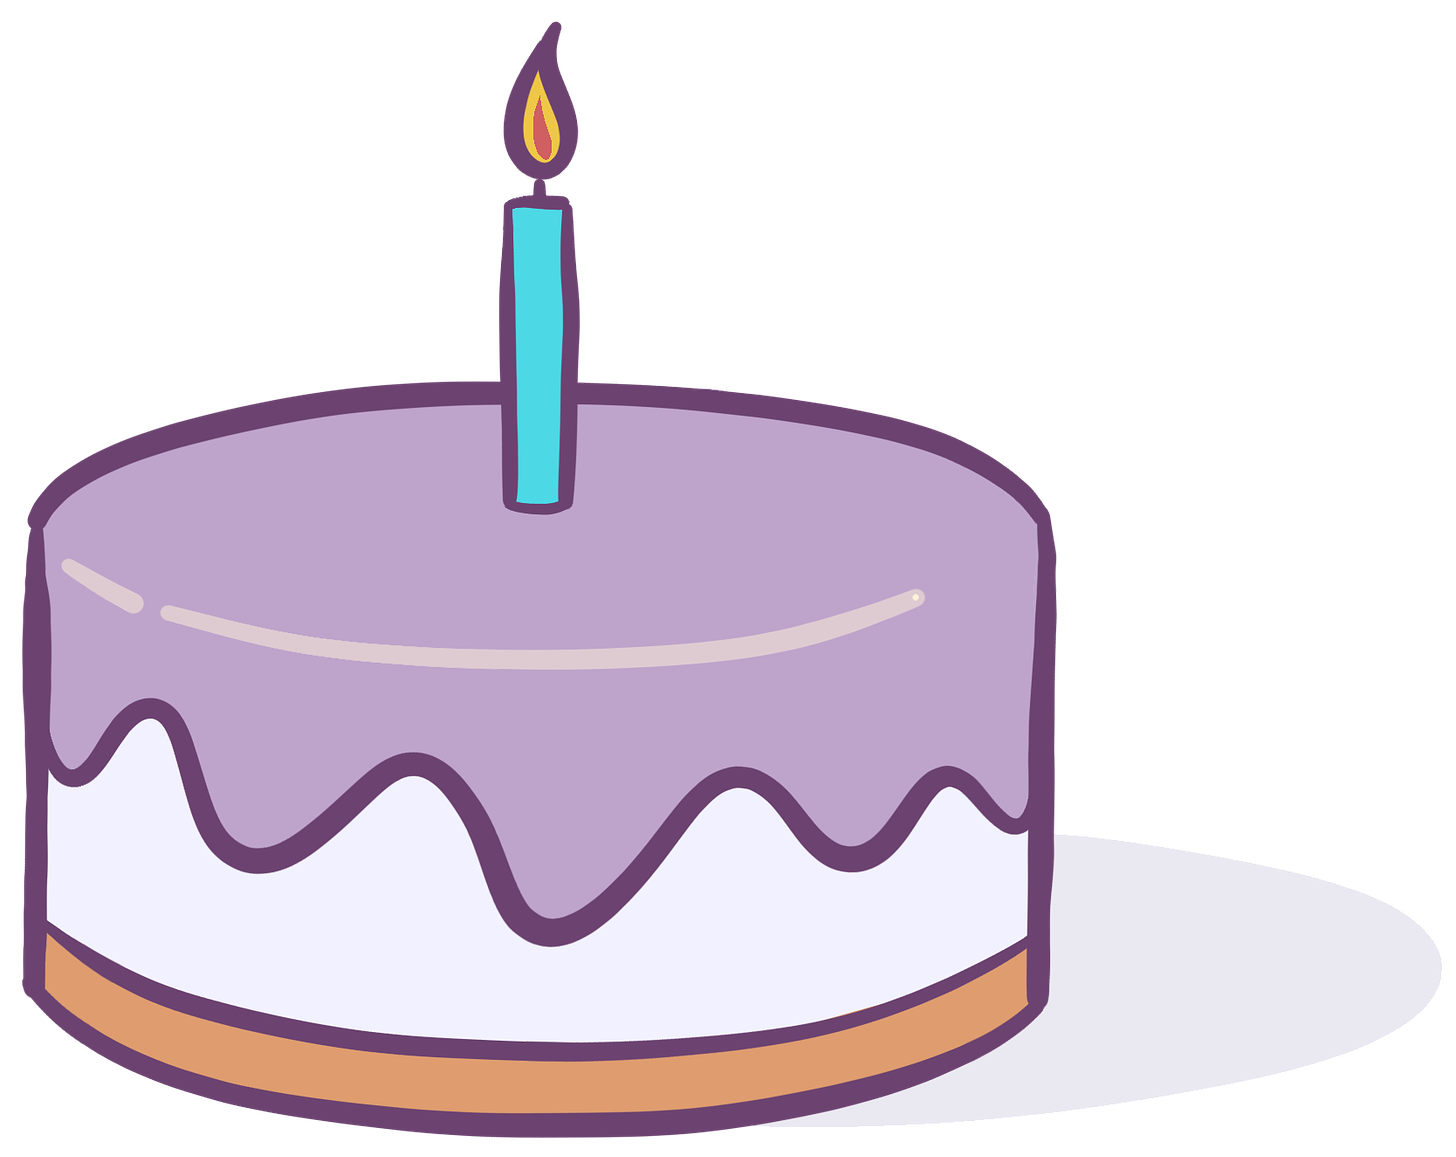 A birthday cake with a single candle